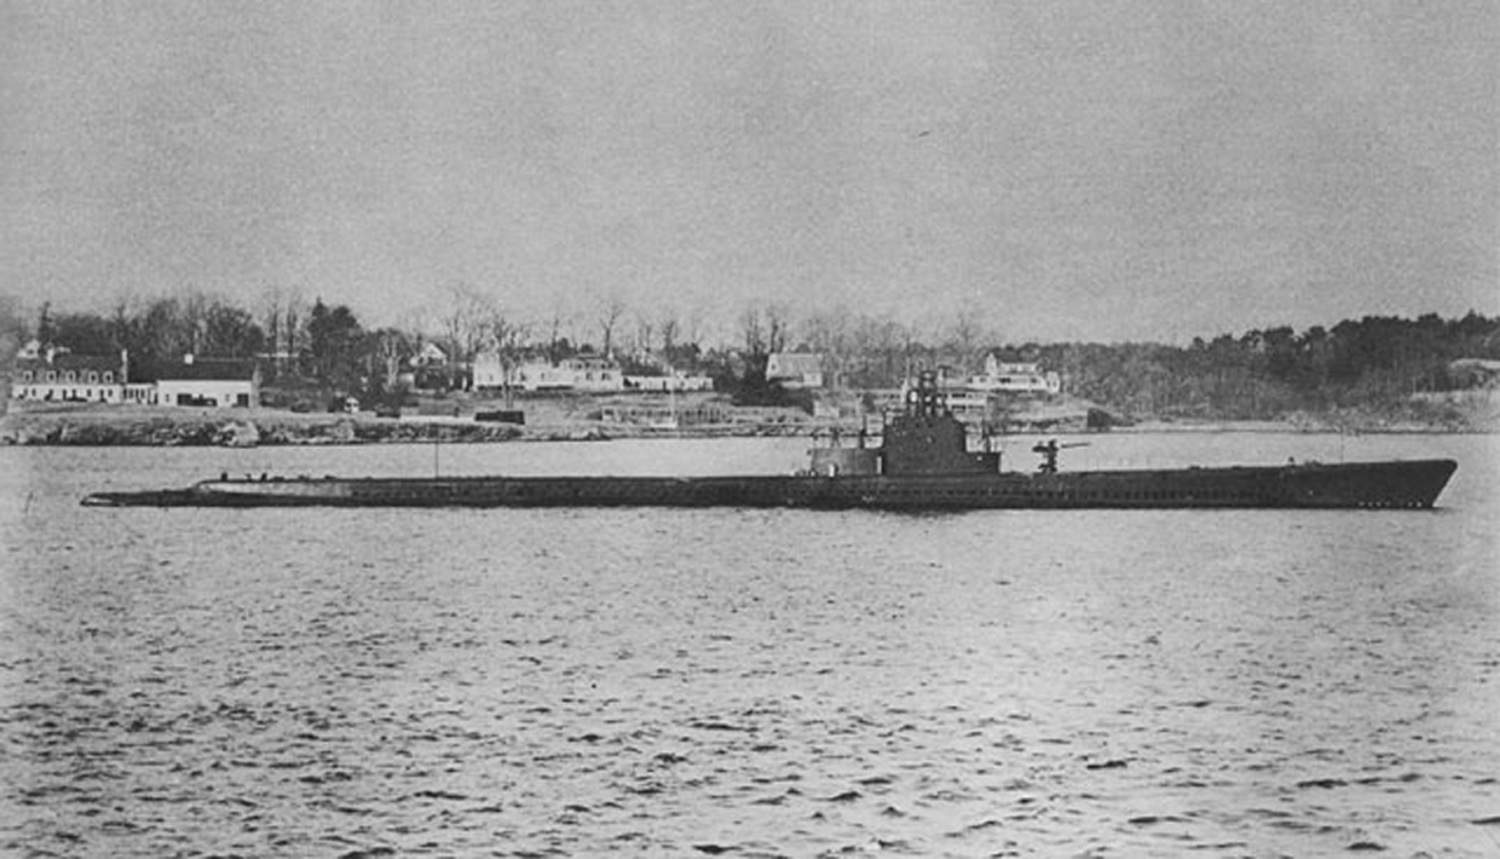 USS Scorpion in the Piscataqua River shortly after commissioning, near Portsmouth Naval Shipyard, New Hampshire, United States, 1 Oct 1942